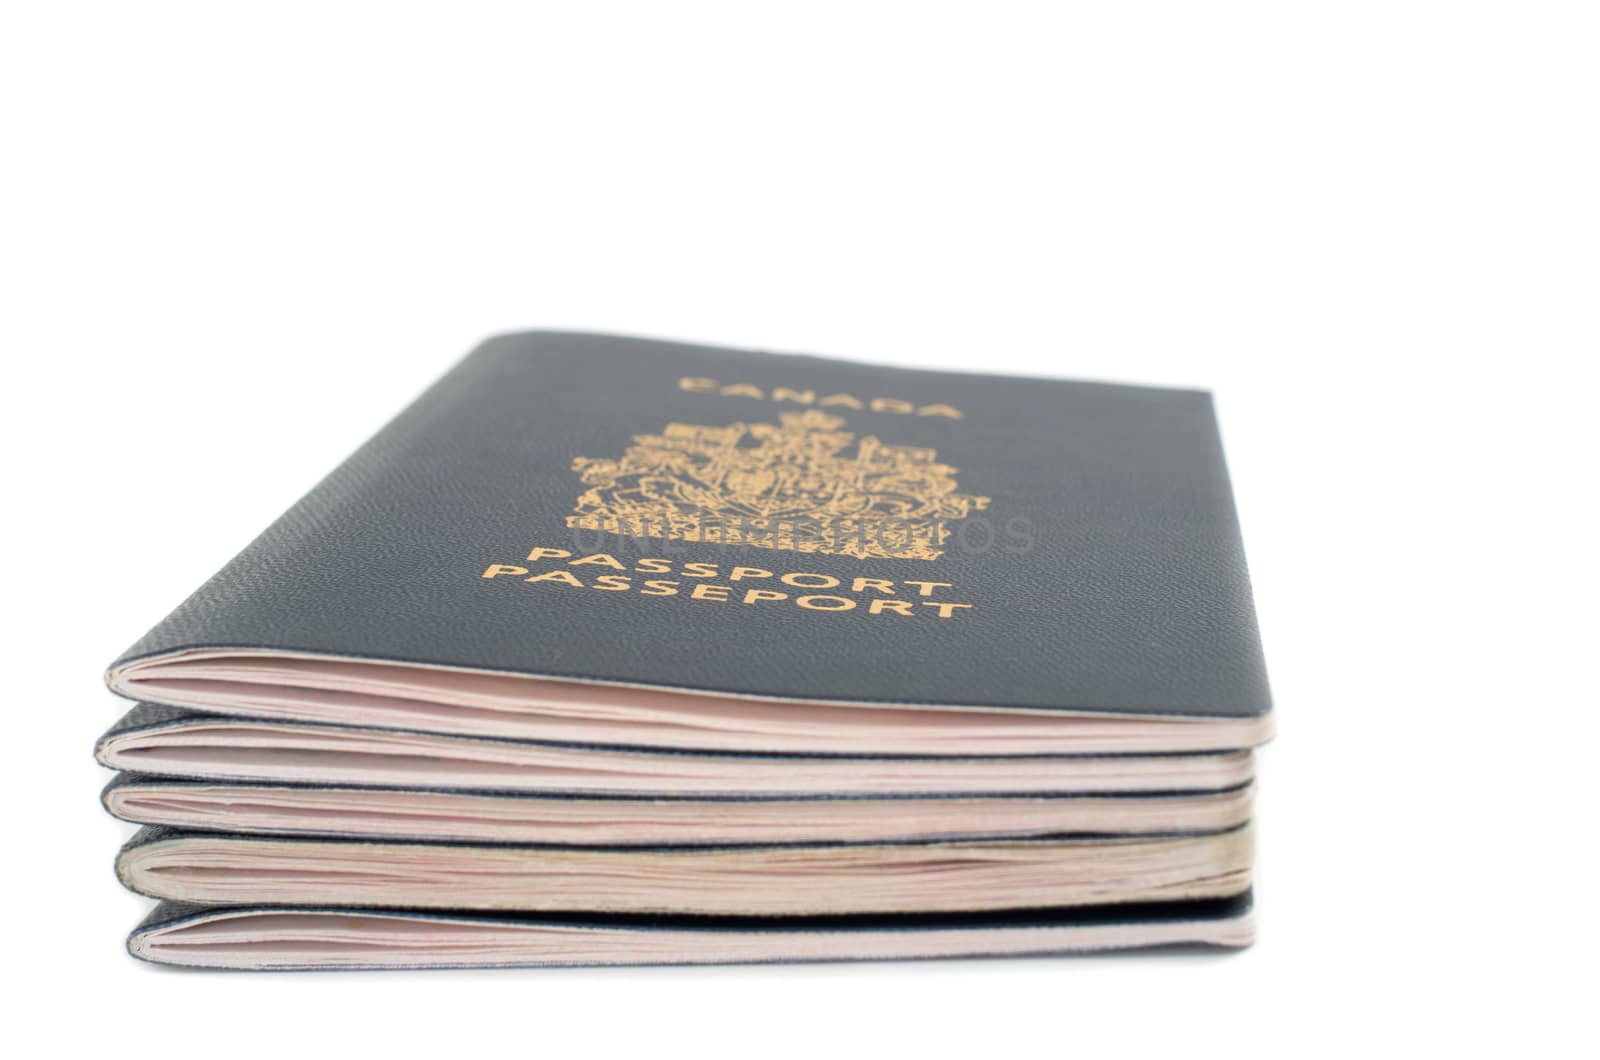 Pile of five passports viewed from the side on white background by daoleduc